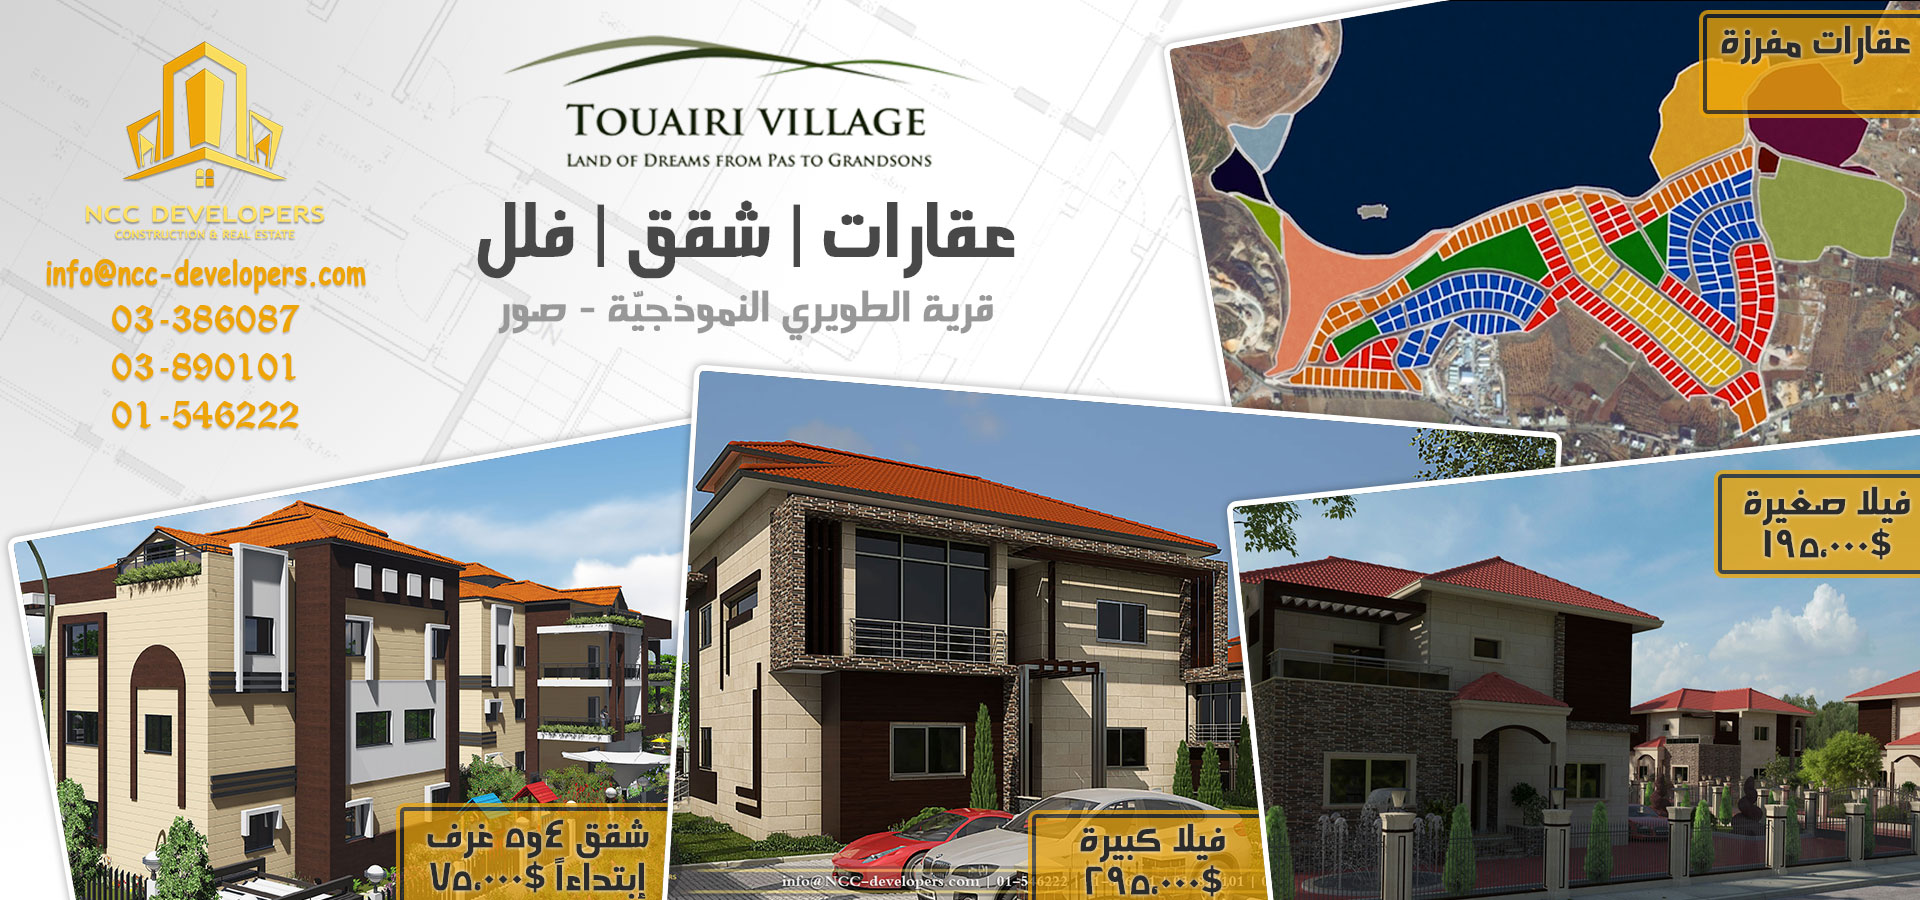 Marketing Banners for NCC Developers Architecture Projects (Residential buildings, Villas...) in Touairi Village, South Lebanon.